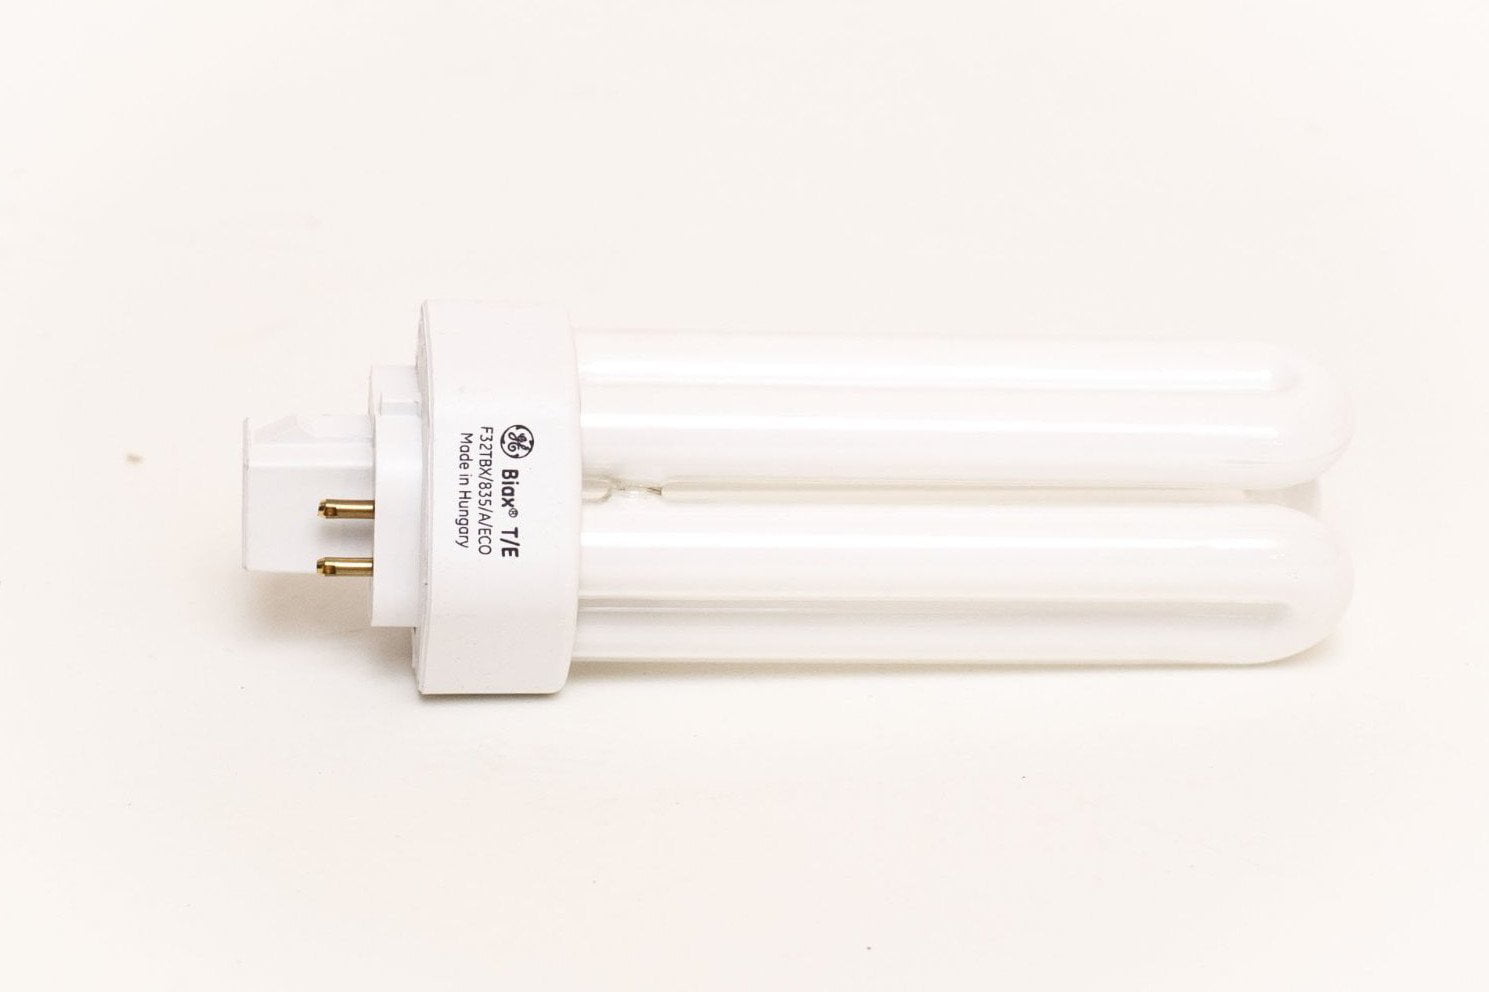 97631 GE F32TBX/835/A/ECO Ecolux 32W 4 Pin CFL Lamp 10 PACK 